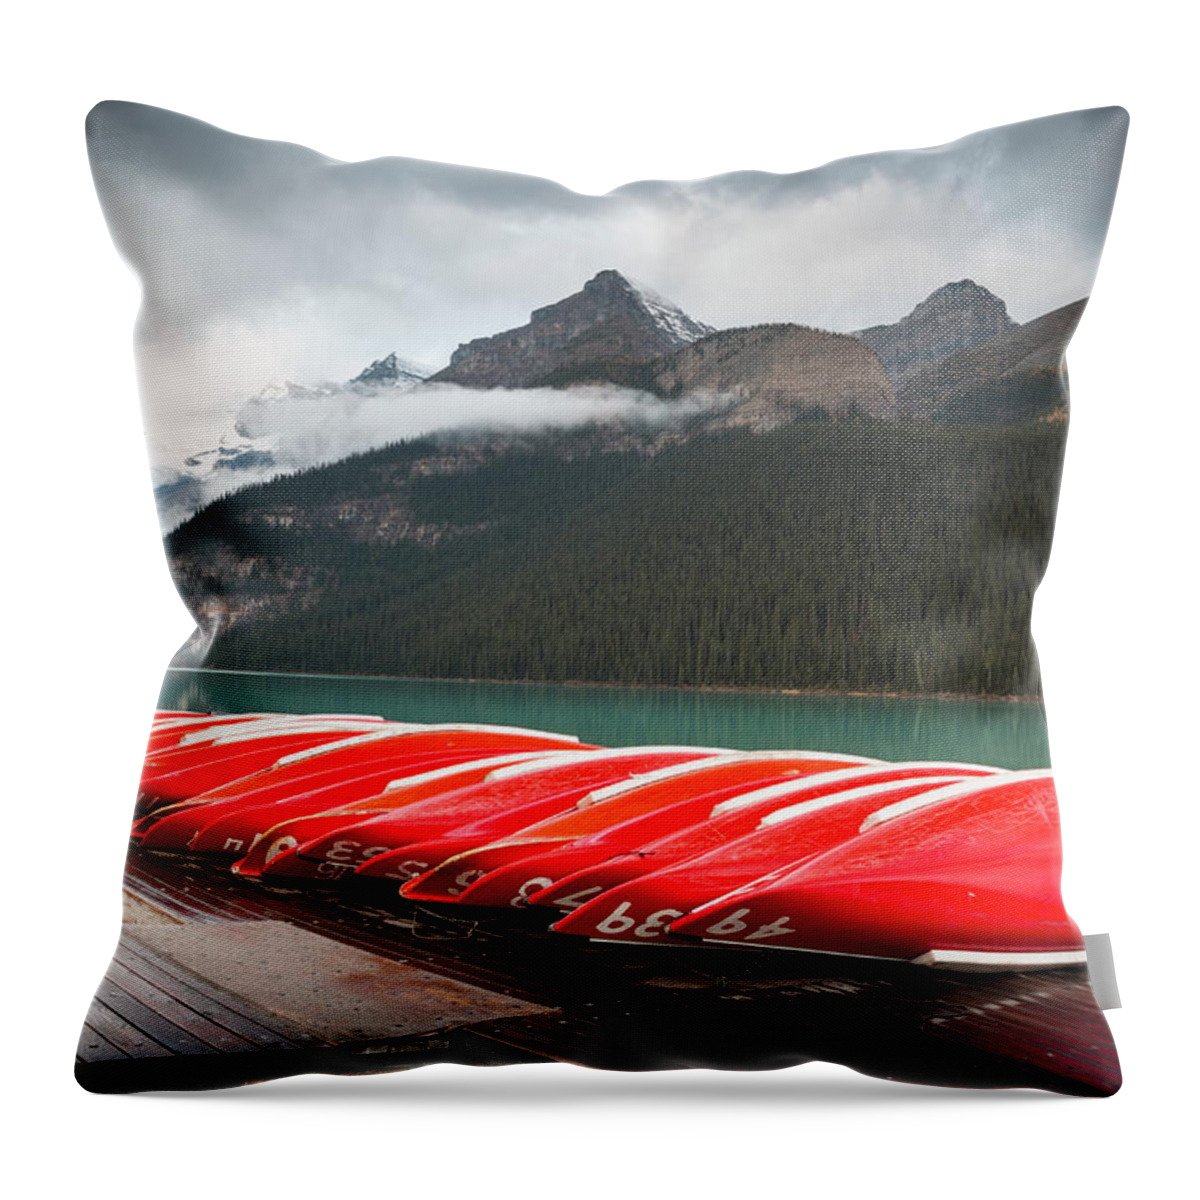 Camping Throw Pillow featuring the photograph Canoes On The Dock by Pgiam